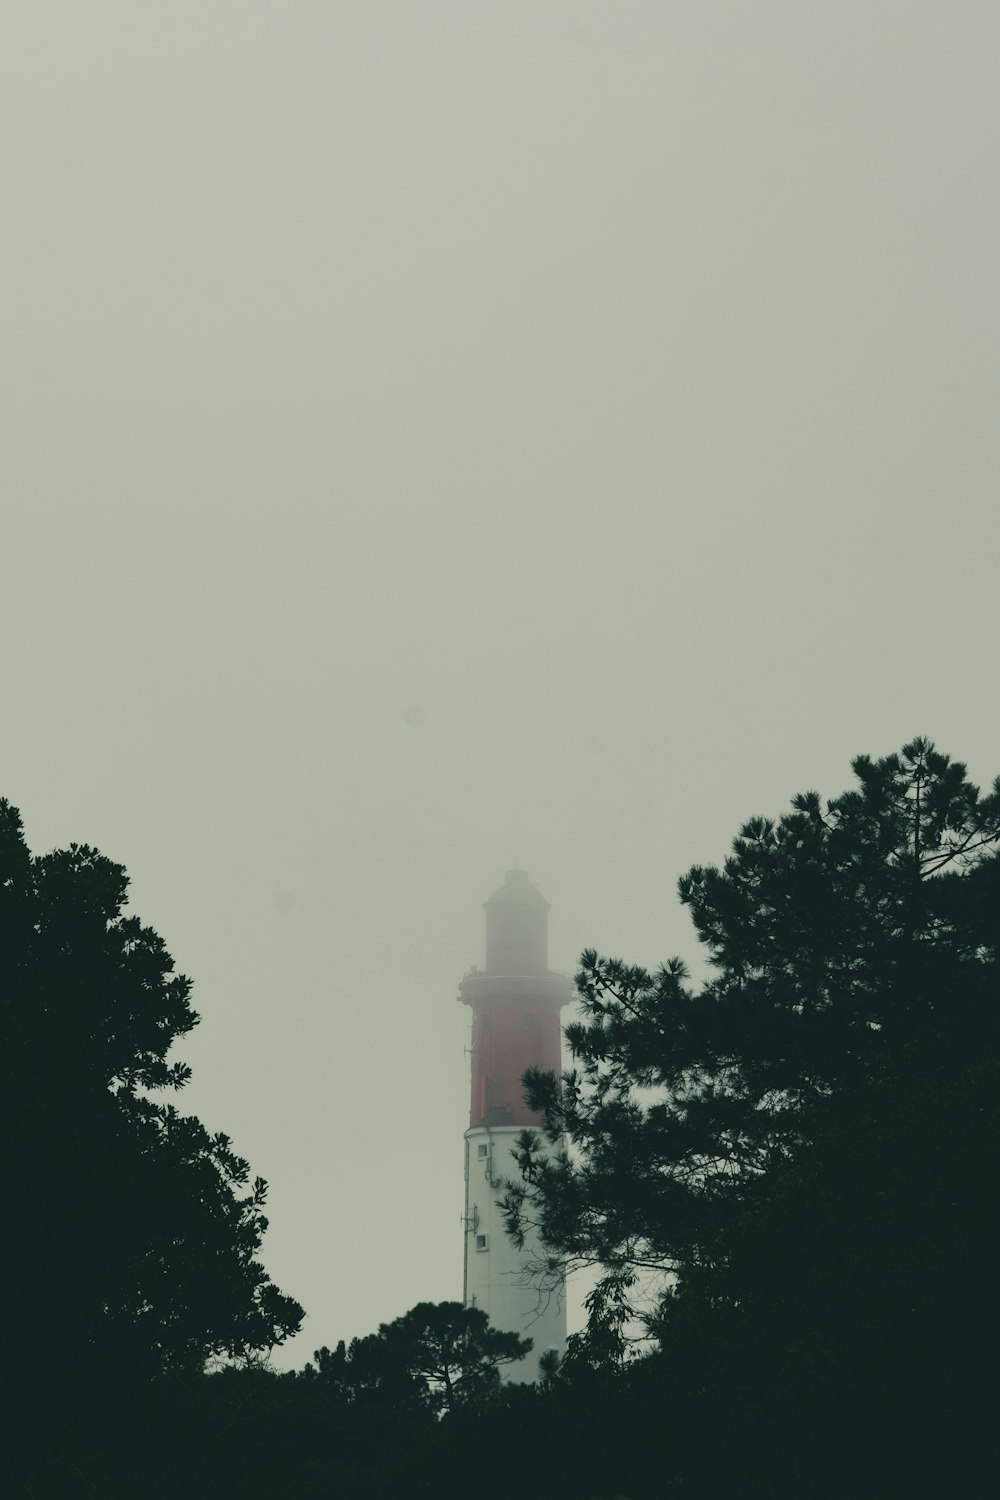 a light house surrounded by trees on a foggy day